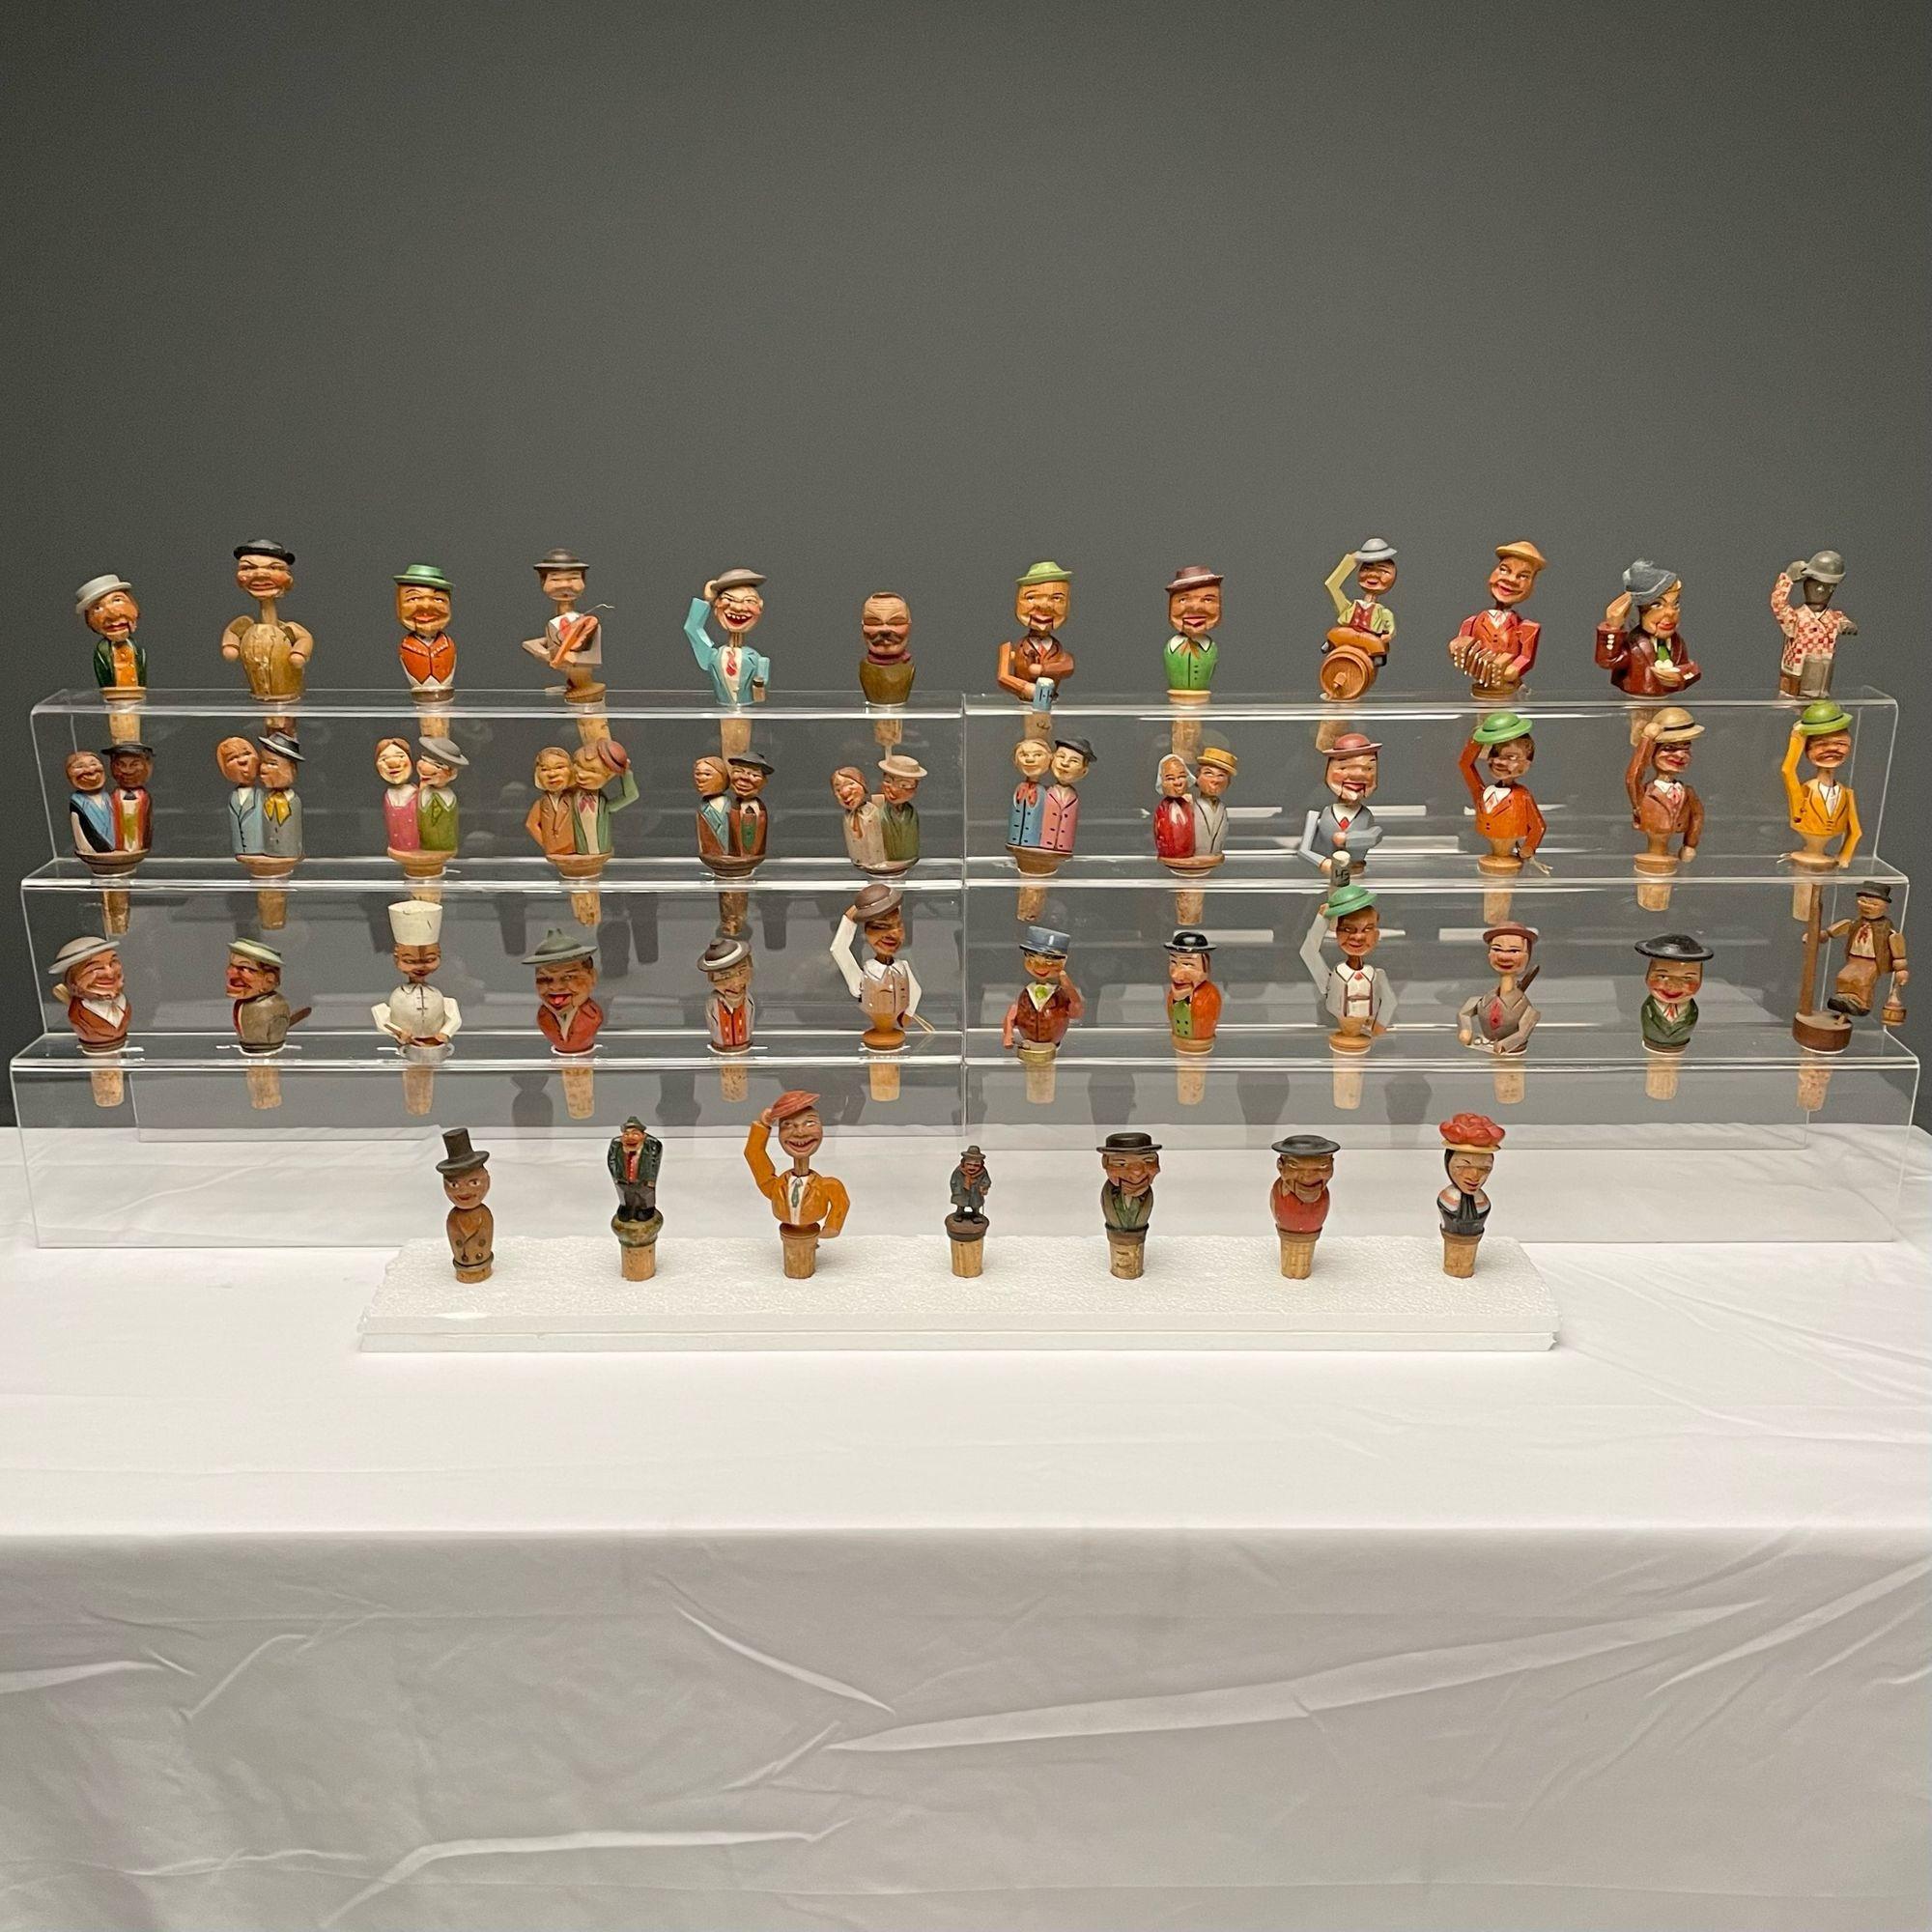 German, Cork Wine Stoppers, Hand Carved, Painted Wood, 19th/20th Century

Large assortment of German puppet style wooden figures, hand-carved and paint decorated, and mounted to bottle cork stoppers. Most feature fascinating tipping movements as